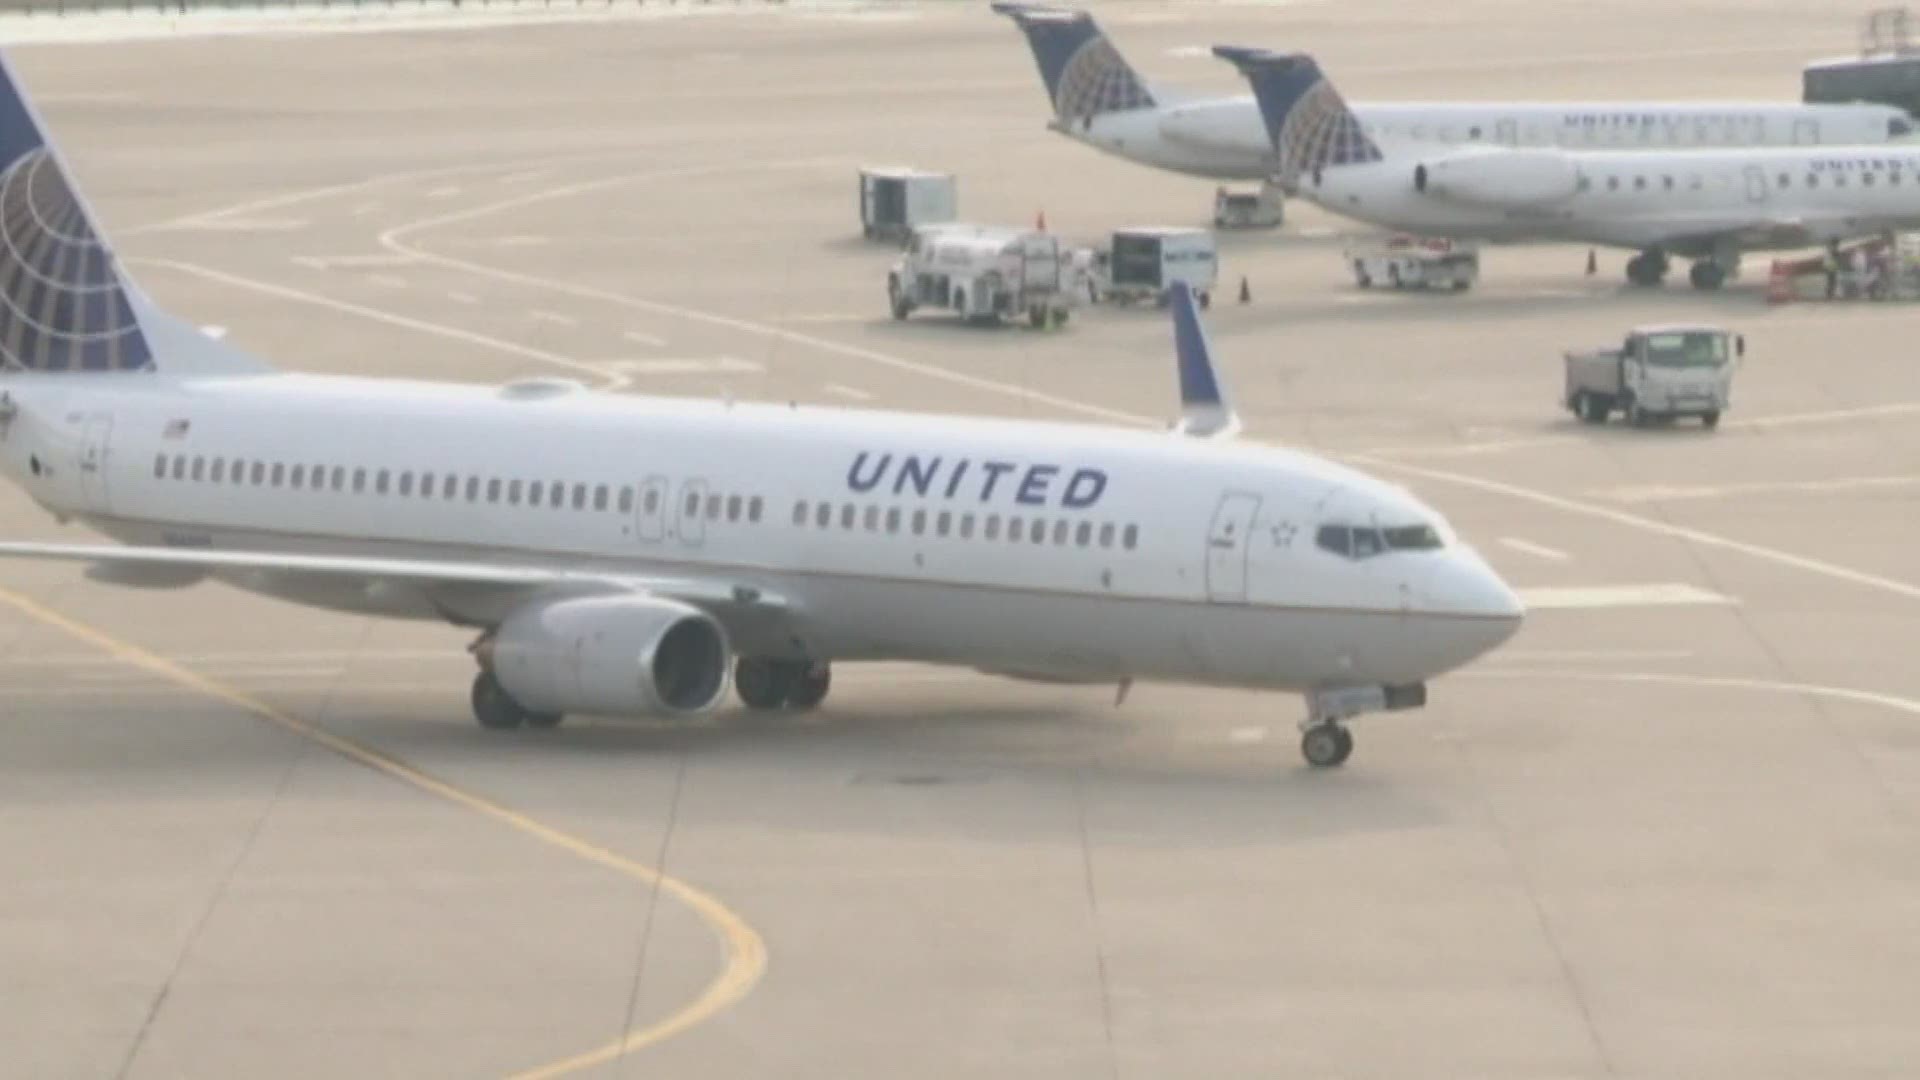 Air travelers in the County, United Airlines will continue operating out of Presque Isle International Airport.